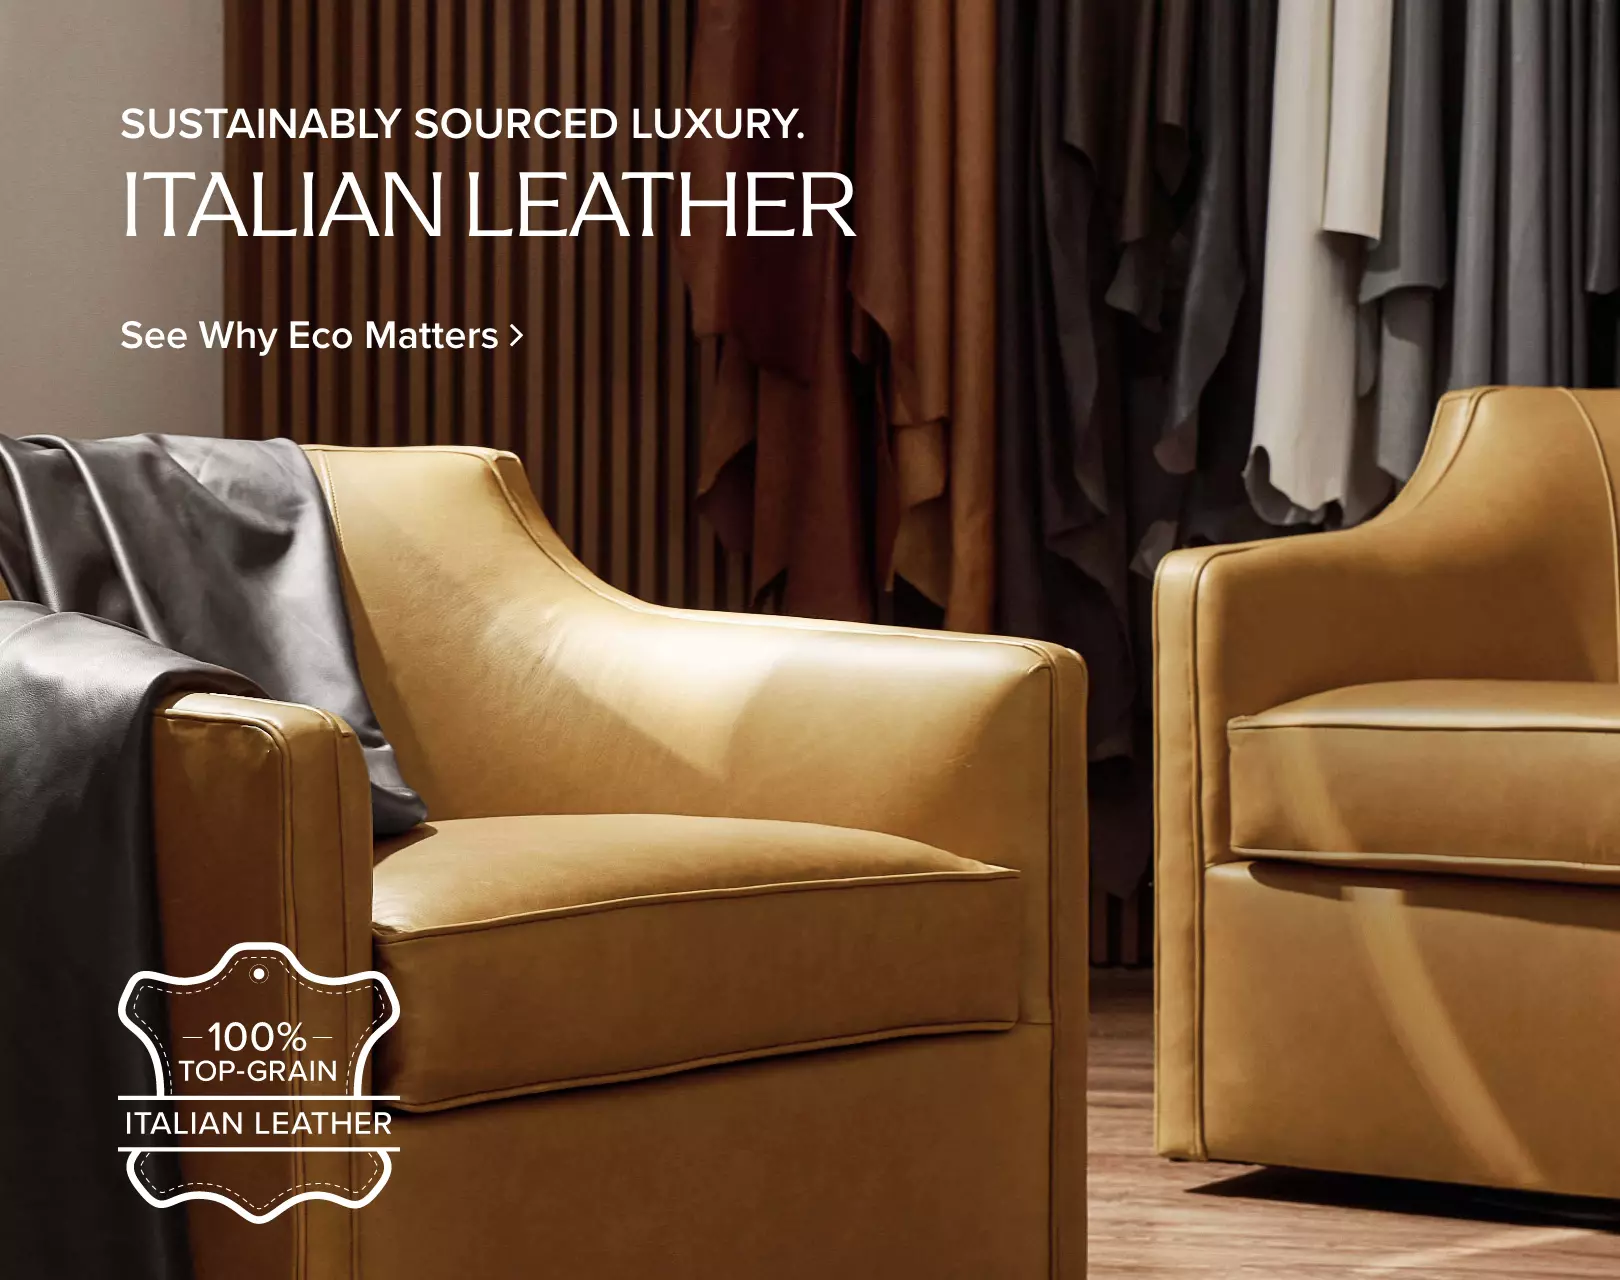 Sustainably Sourced Luxury Italian Leather